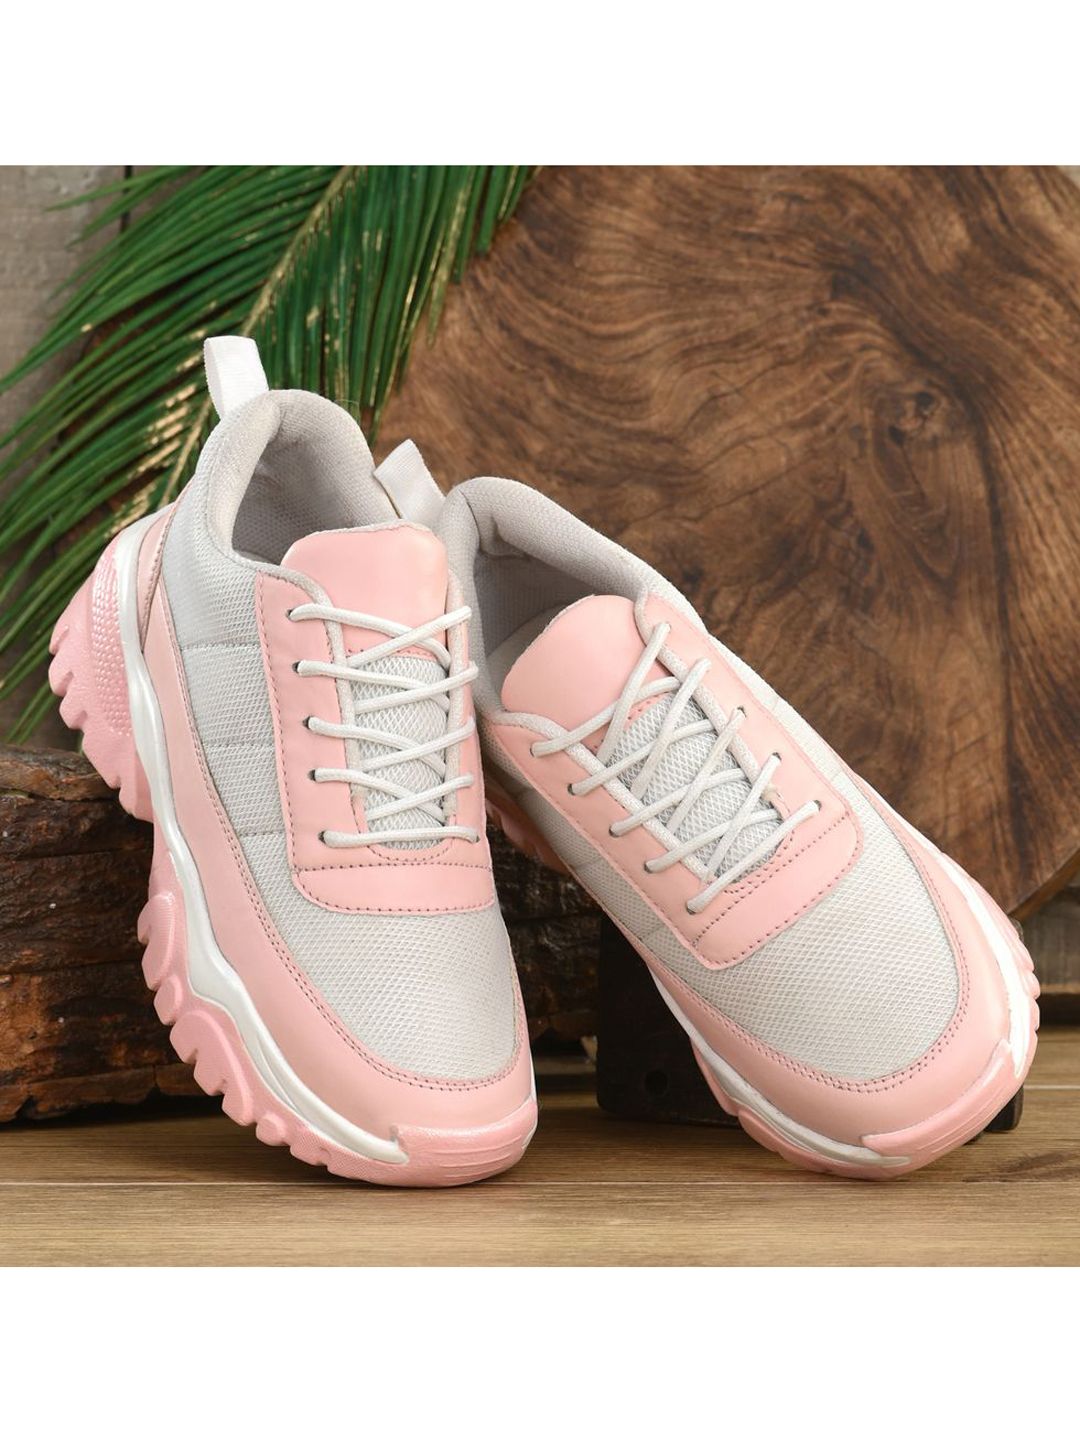 DEAS Women Pink Colourblocked Sneakers Price in India